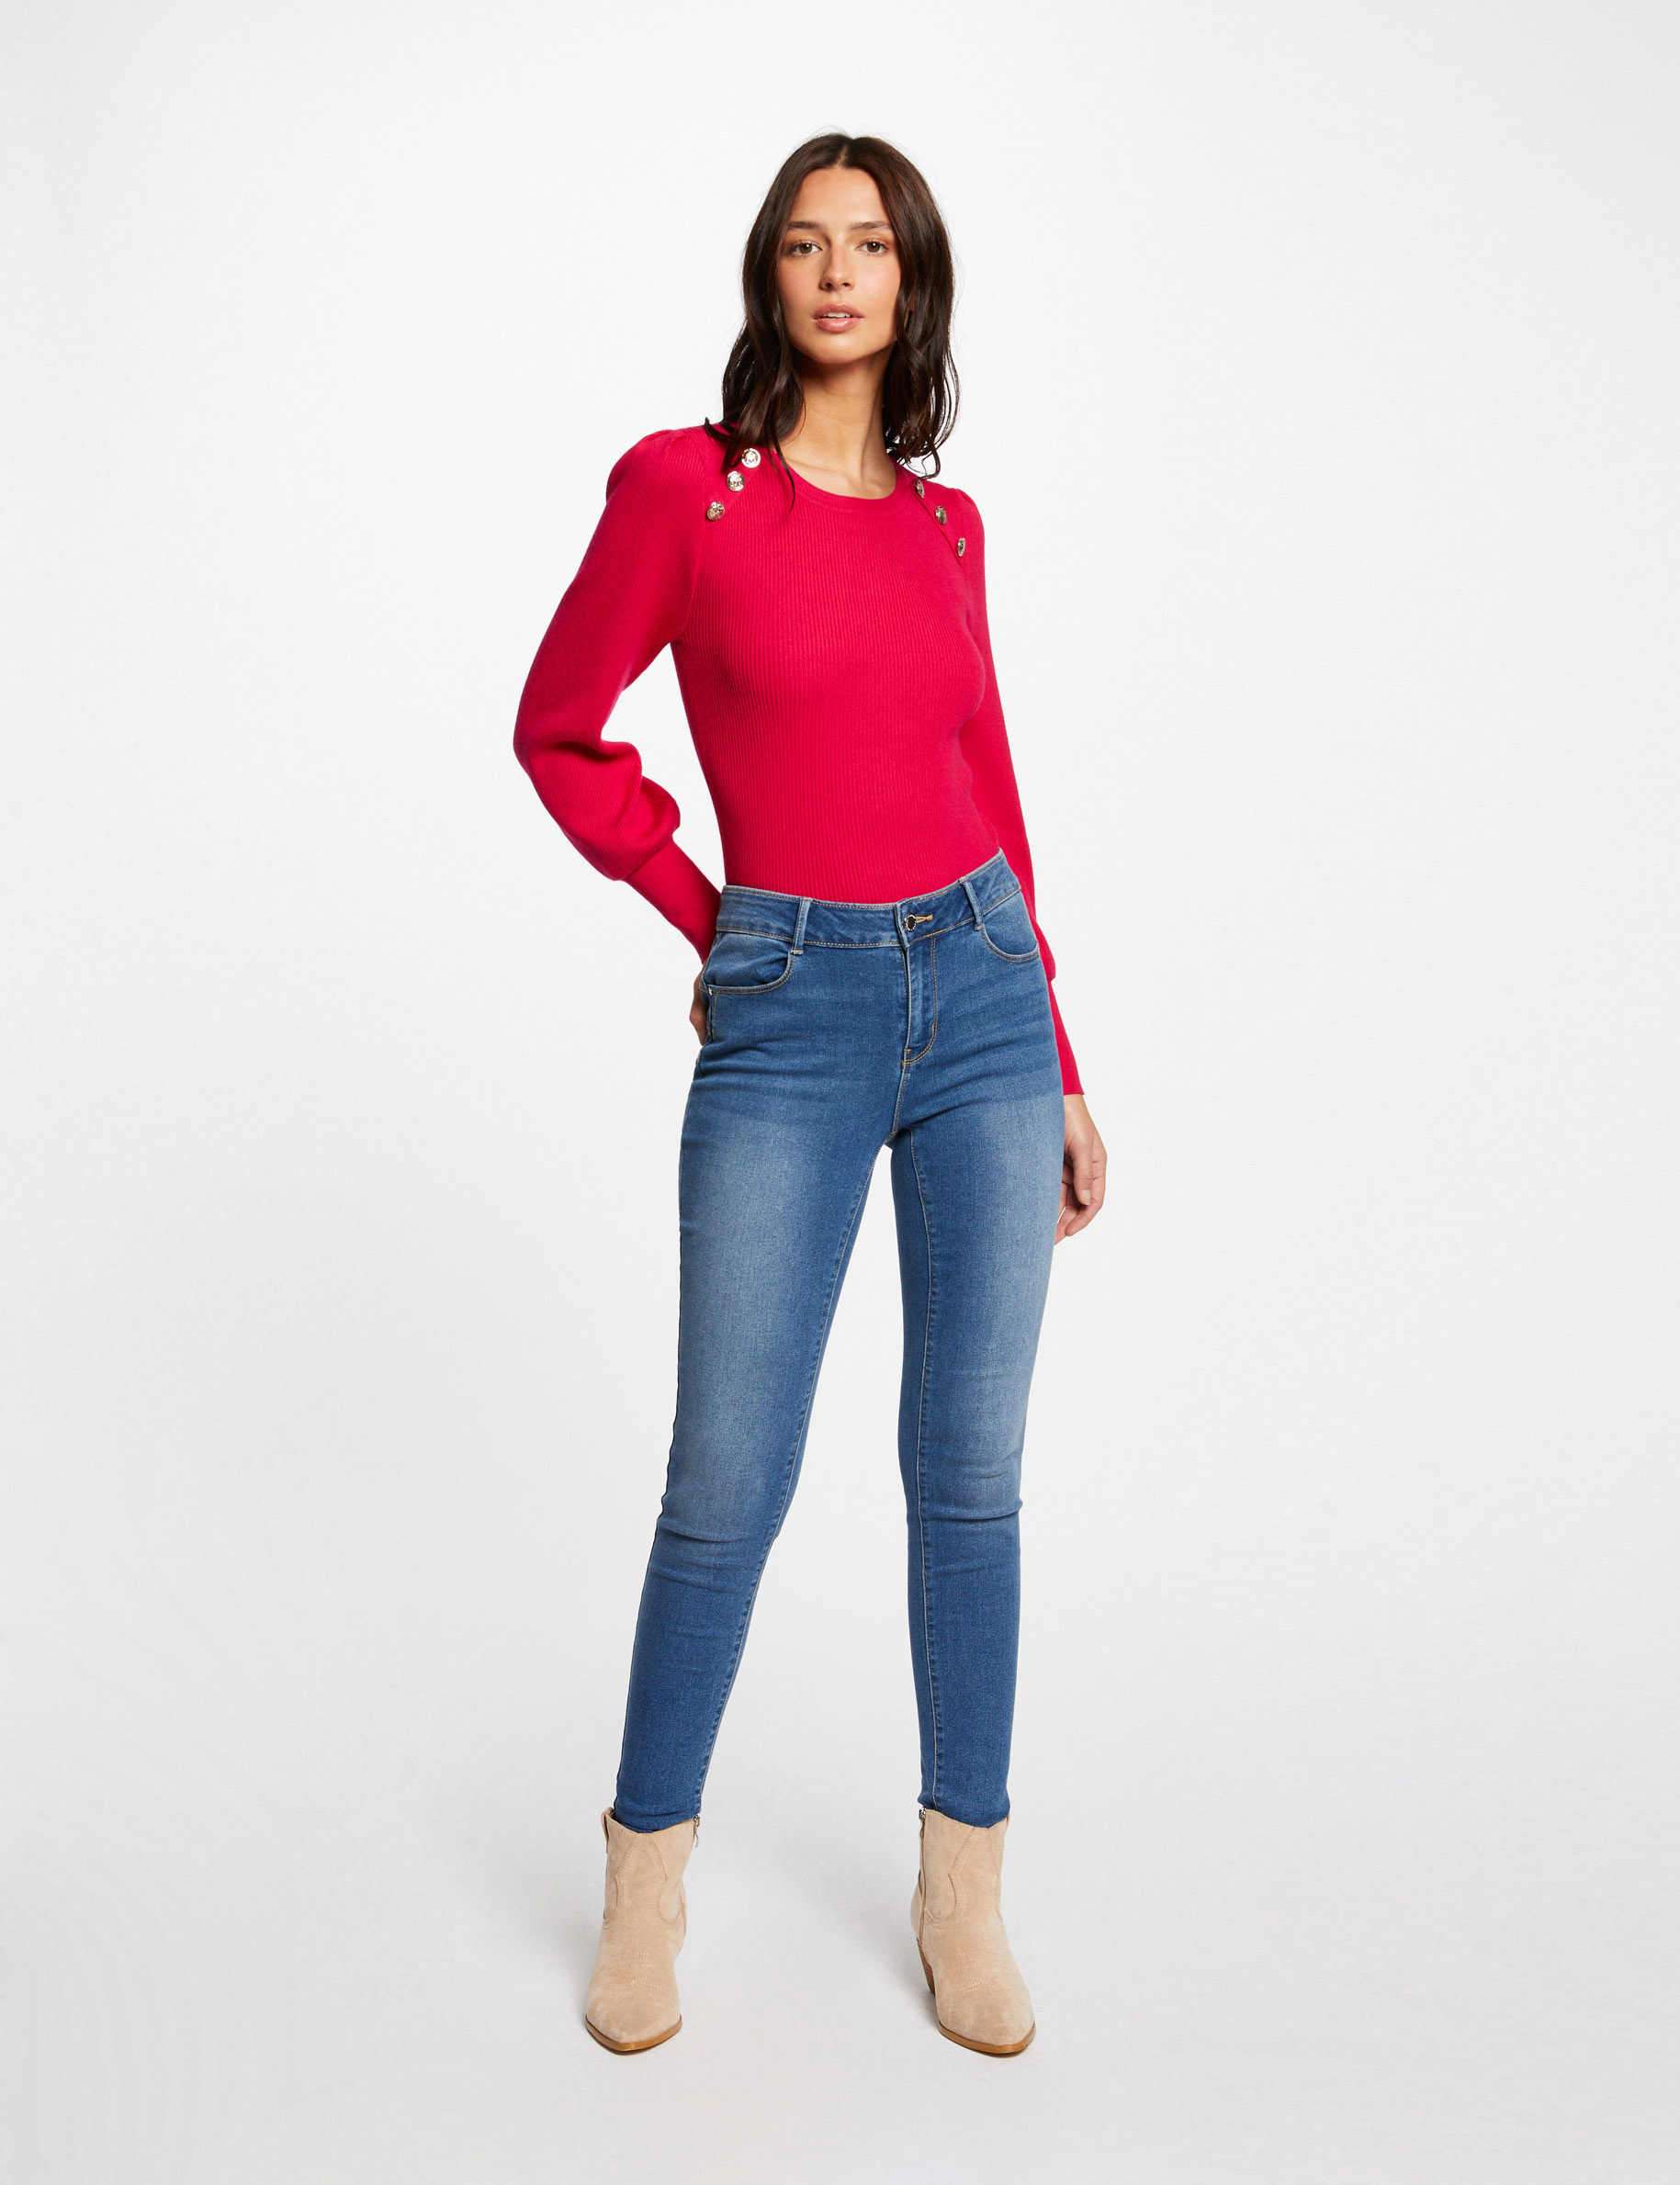 Pull manches longues avec boutons fuchsia femme